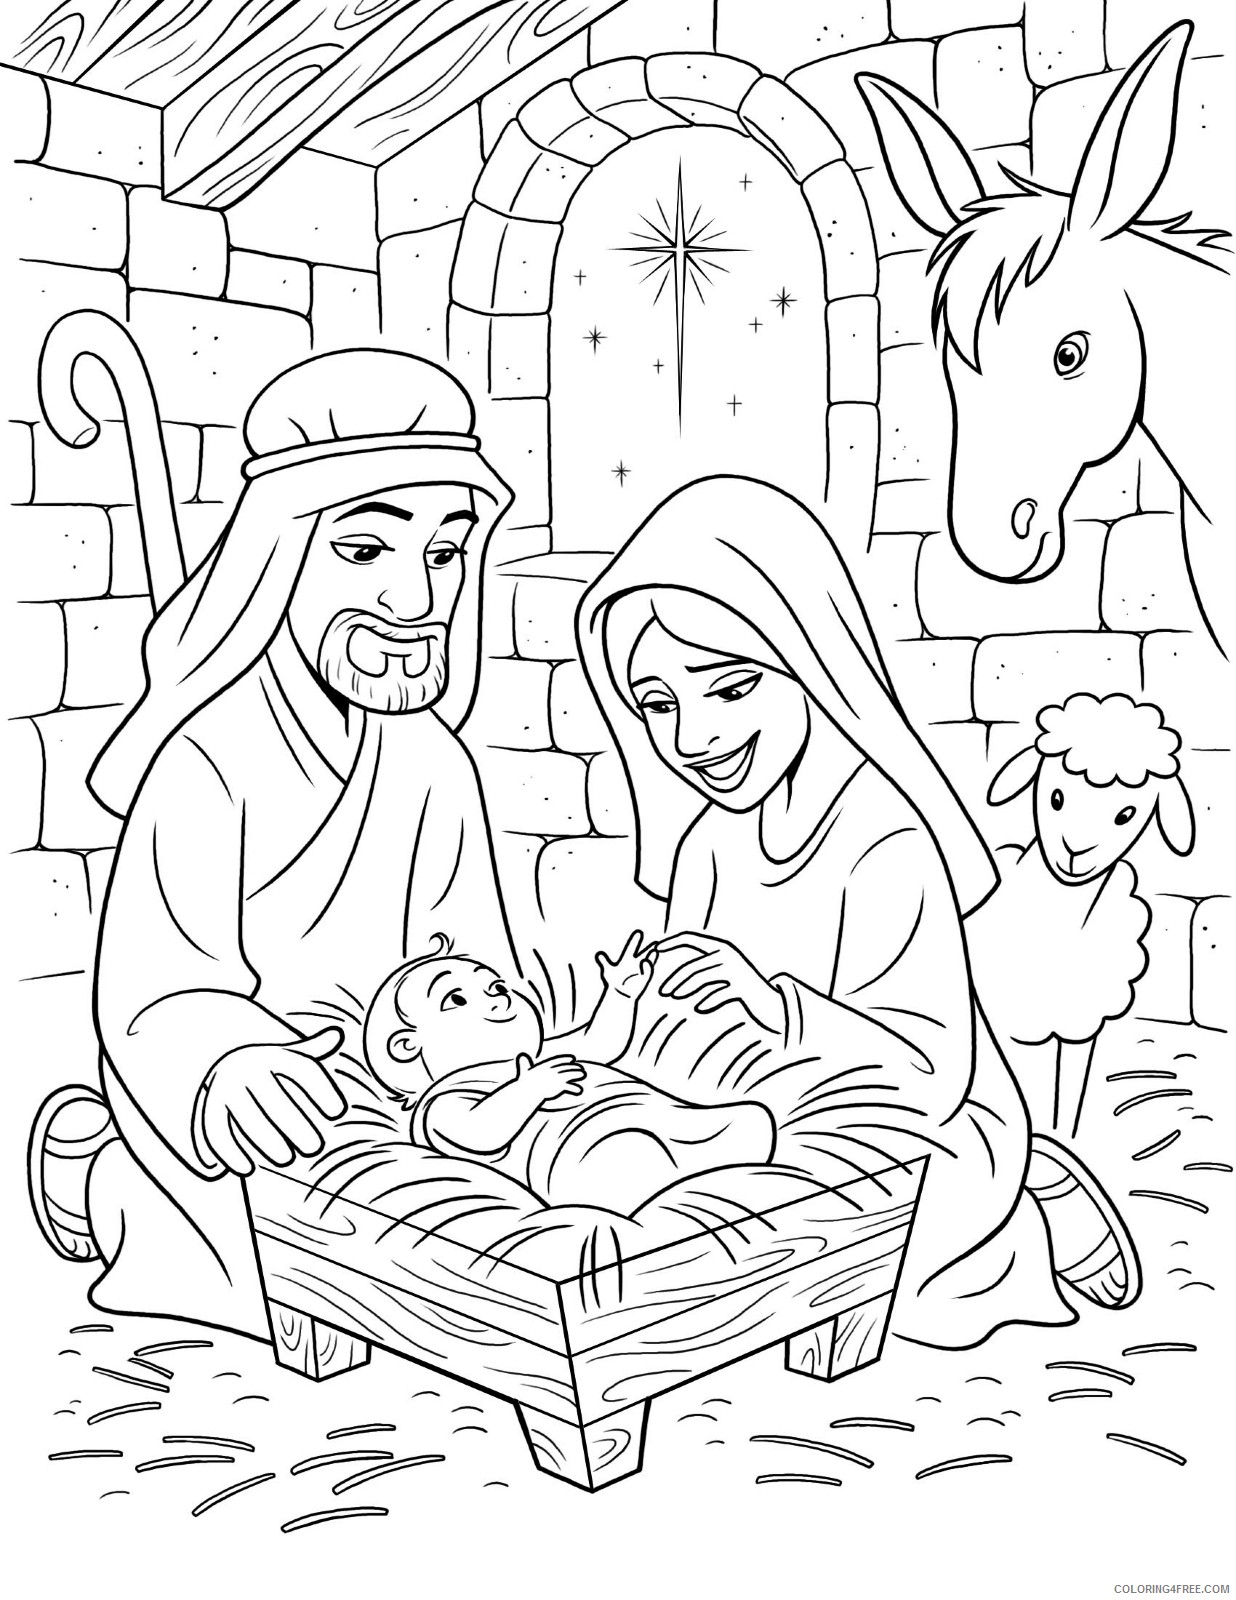 free nativity coloring pages for kids Coloring4free